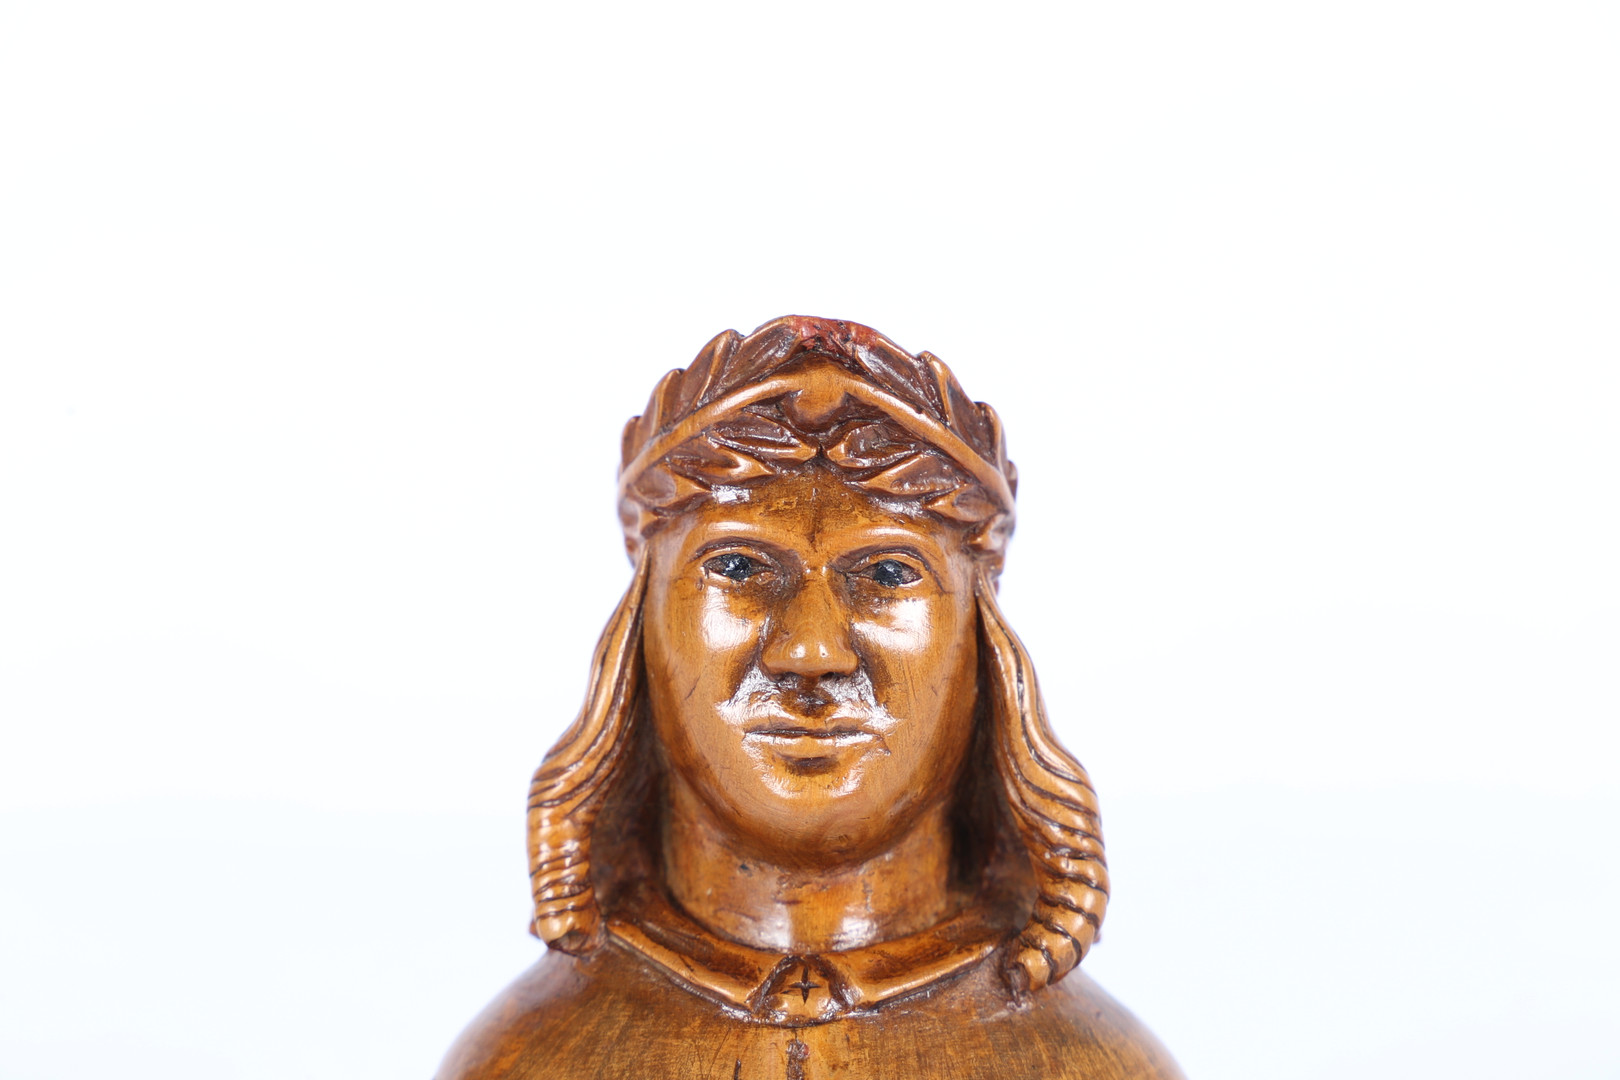 AN EARLY 19TH CENTURY BOXWOOD SNUFF BOX BUST OF THE YOUNG NAPOLEON CROWNED EMPEROR. - Image 2 of 8